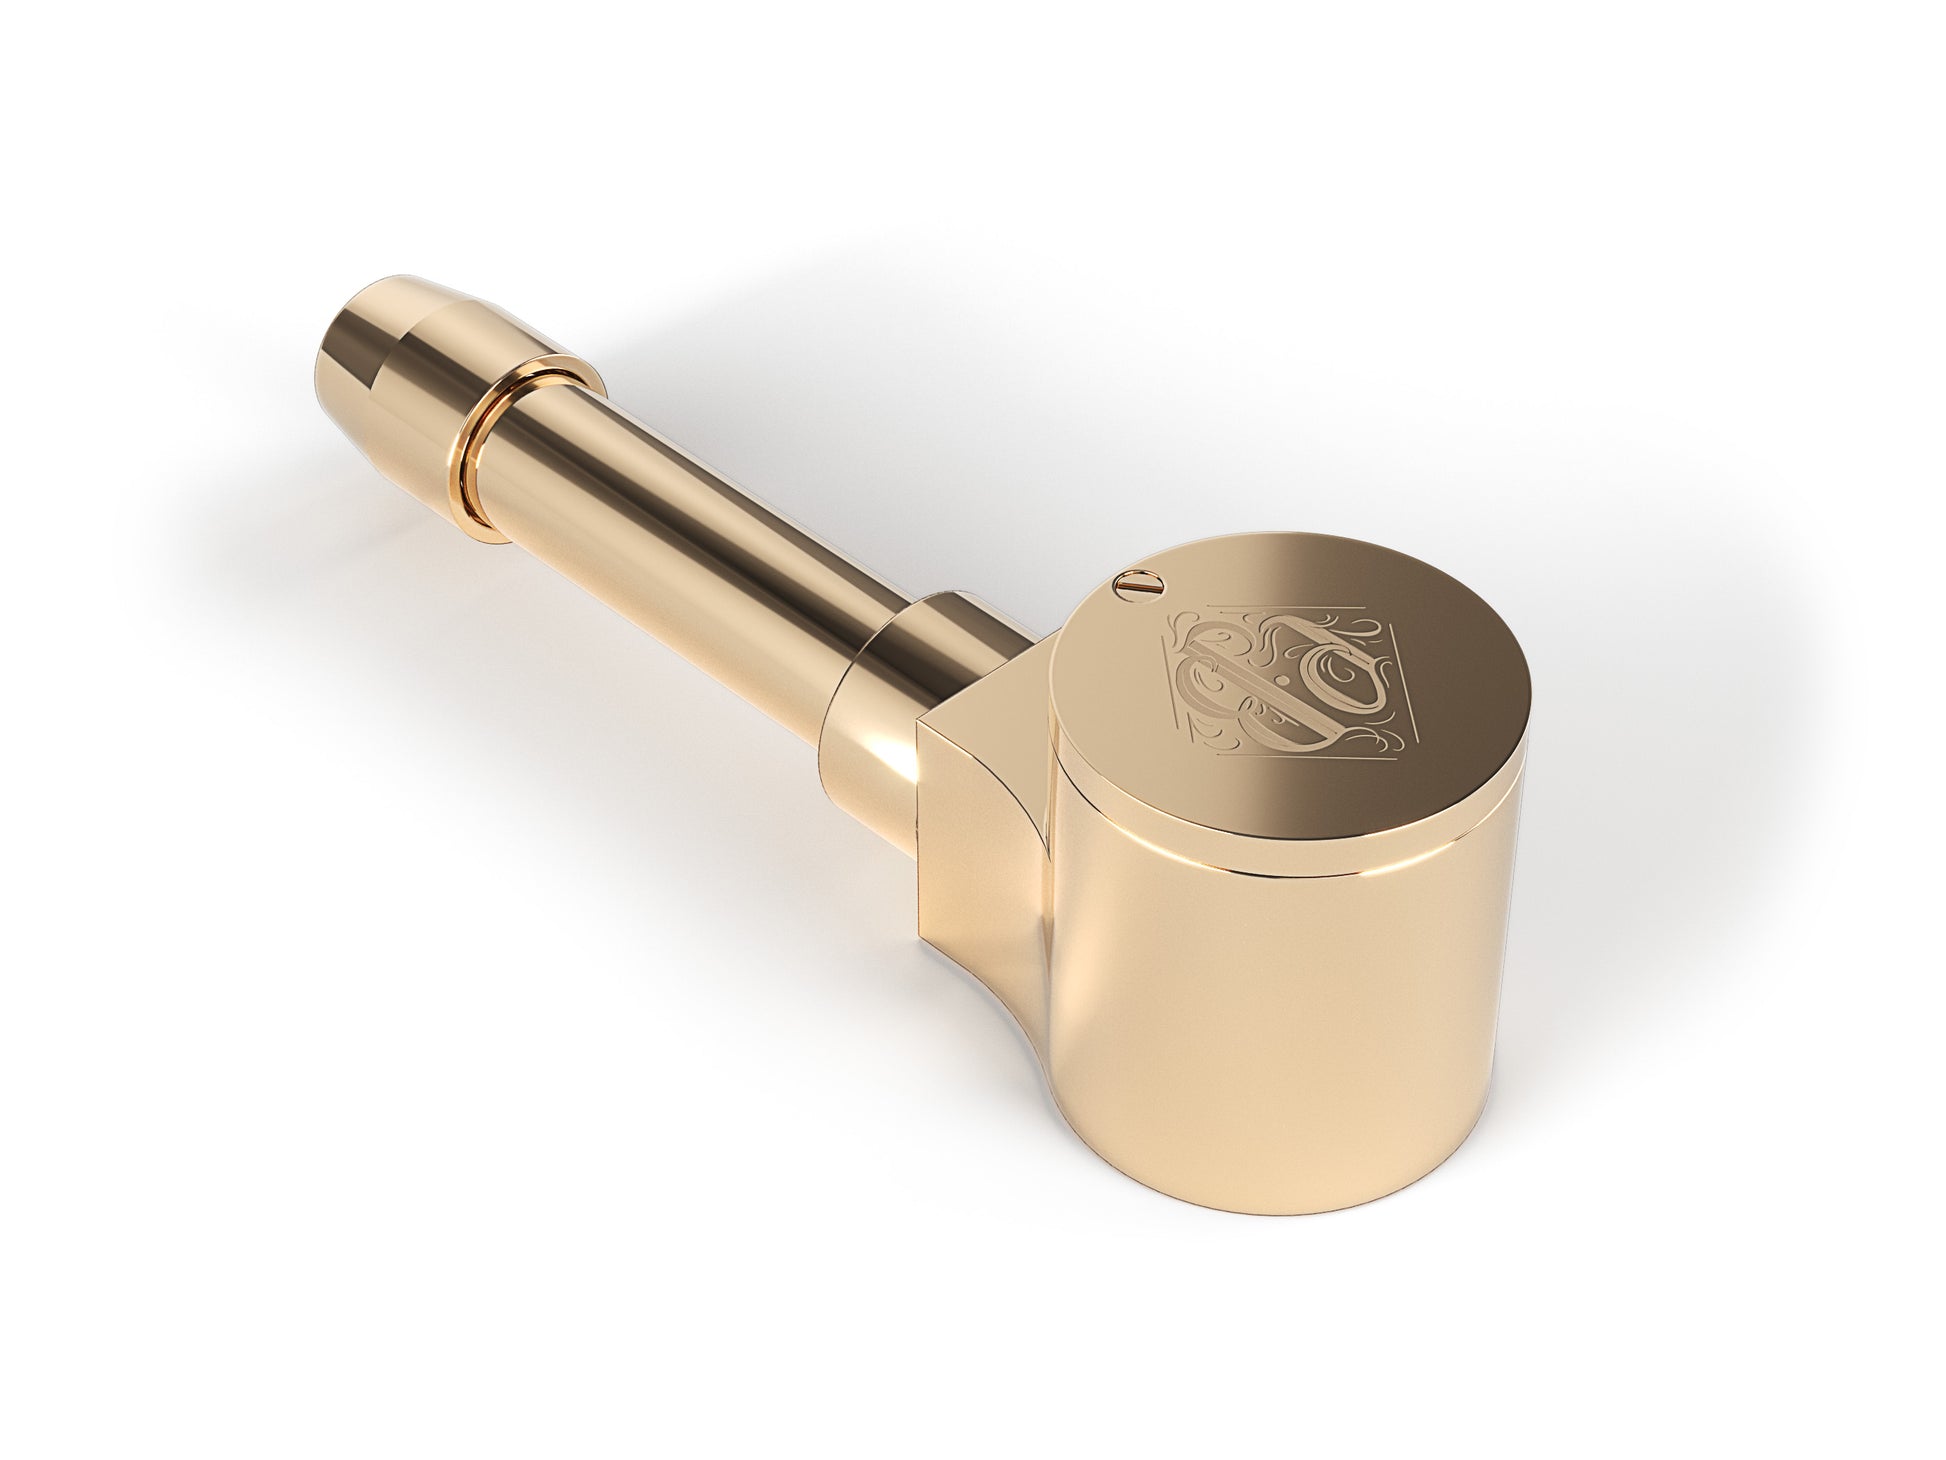 Parkdale Brass Disrupting Metal Handcrafted Luxury Cannabis Pipe